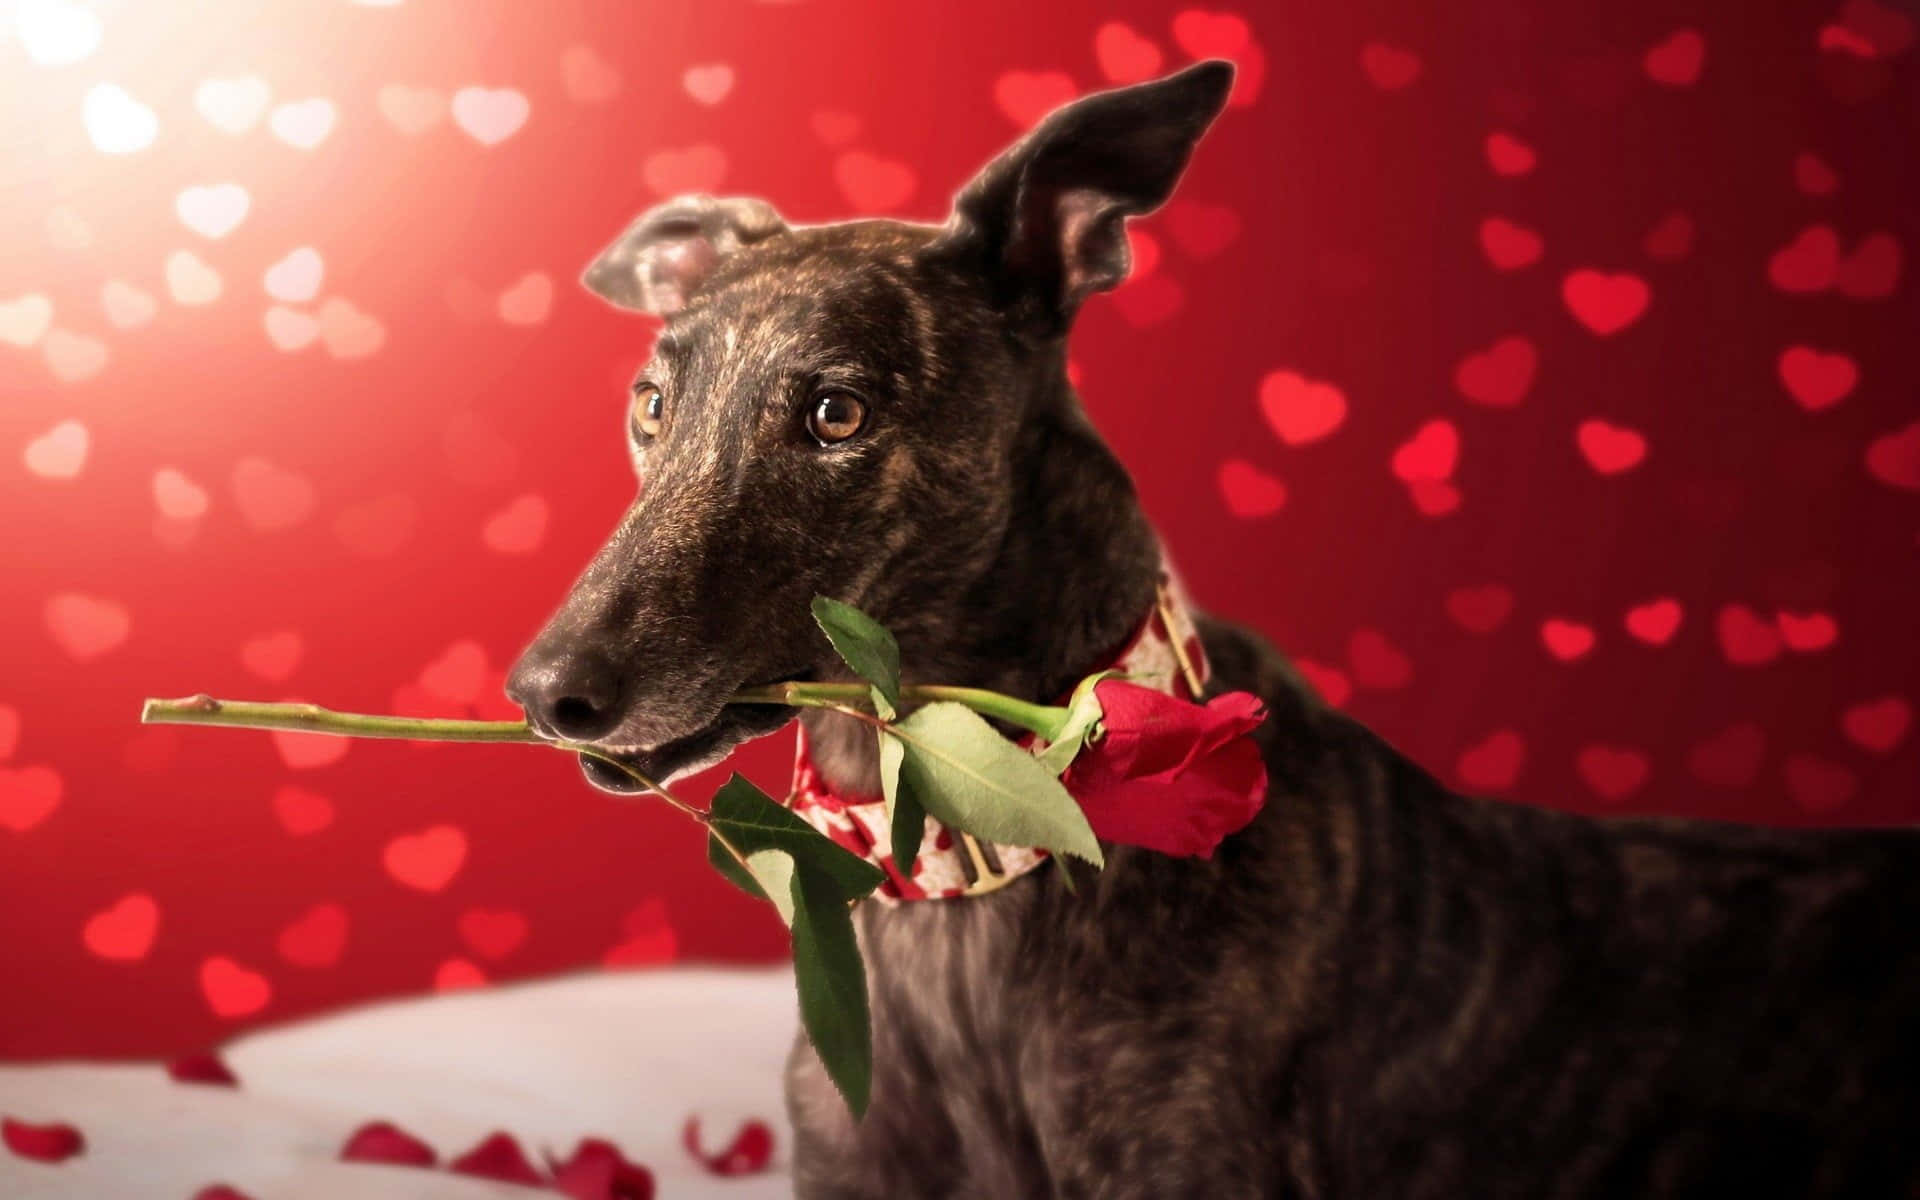 A Greyhound Dog With A Rose In Its Mouth